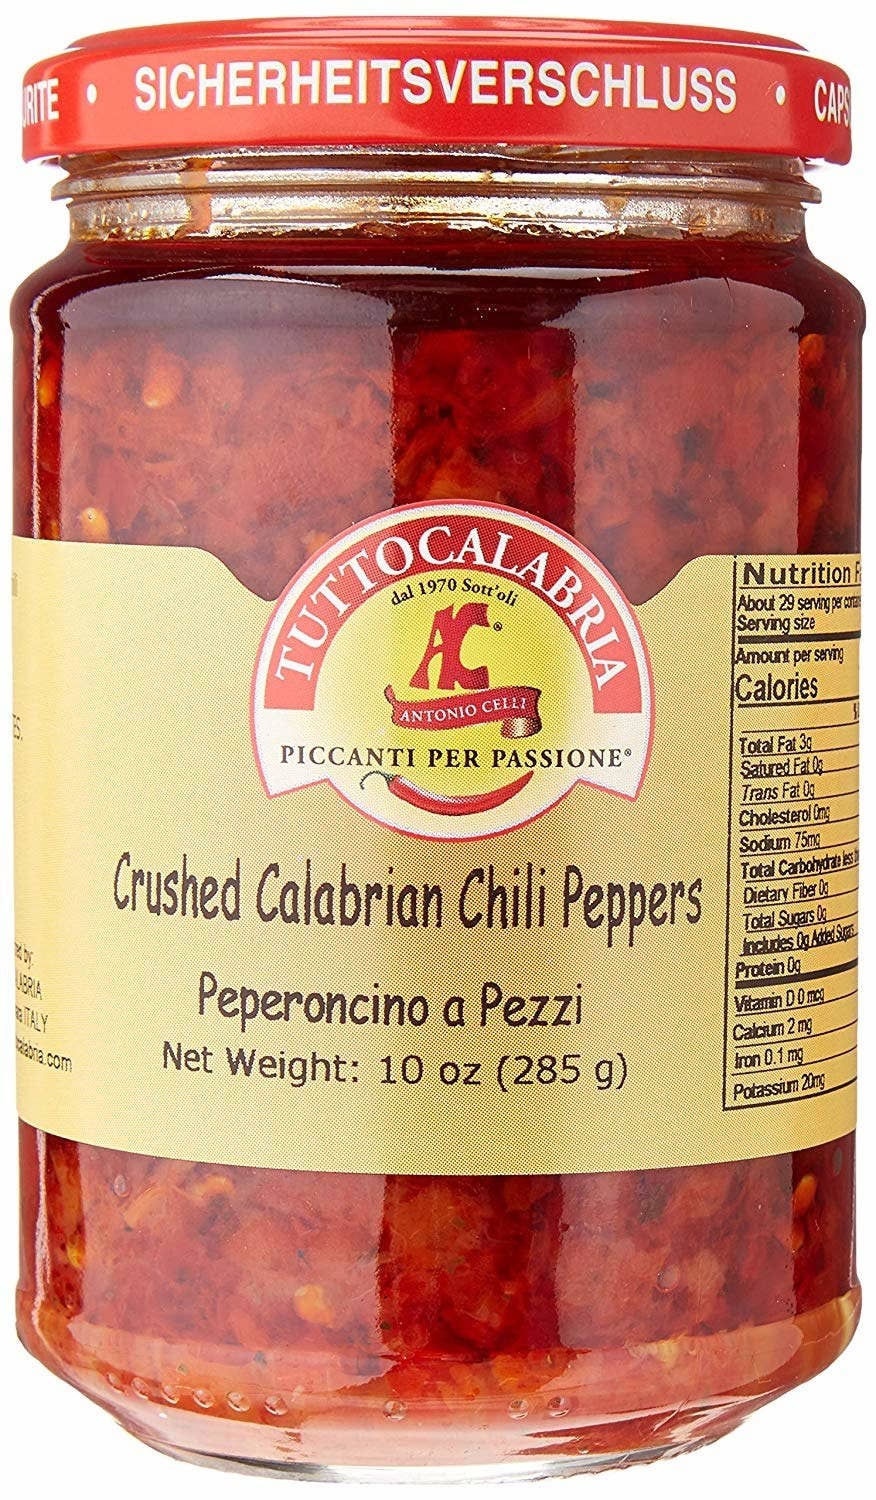 16 Condiments That'll Upgrade Your Food